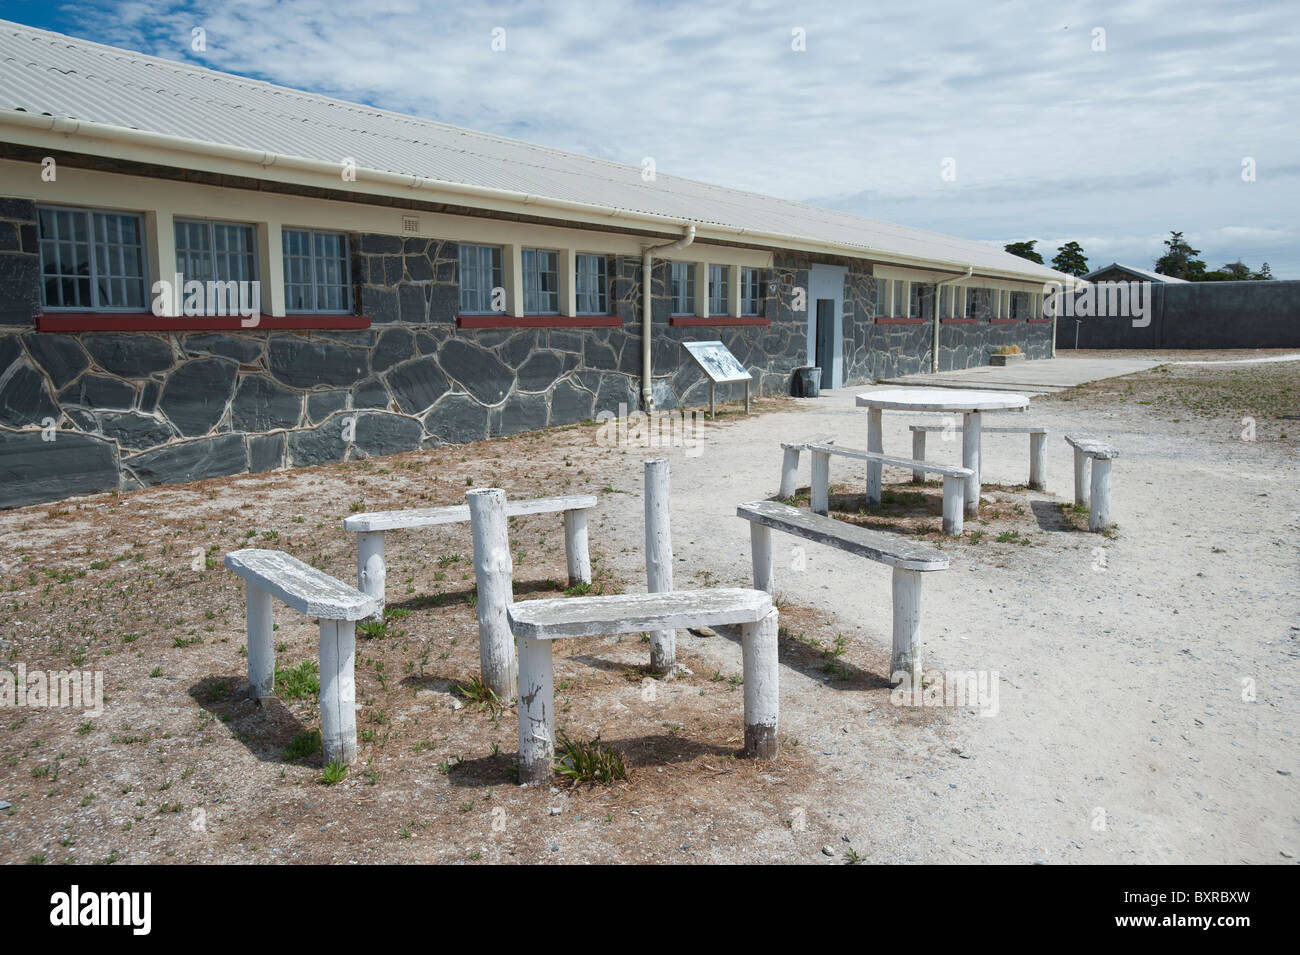 Prison Buildings at Robben Island Maximum Security Prison Complex, Cape Town, South Africa Stock Photo